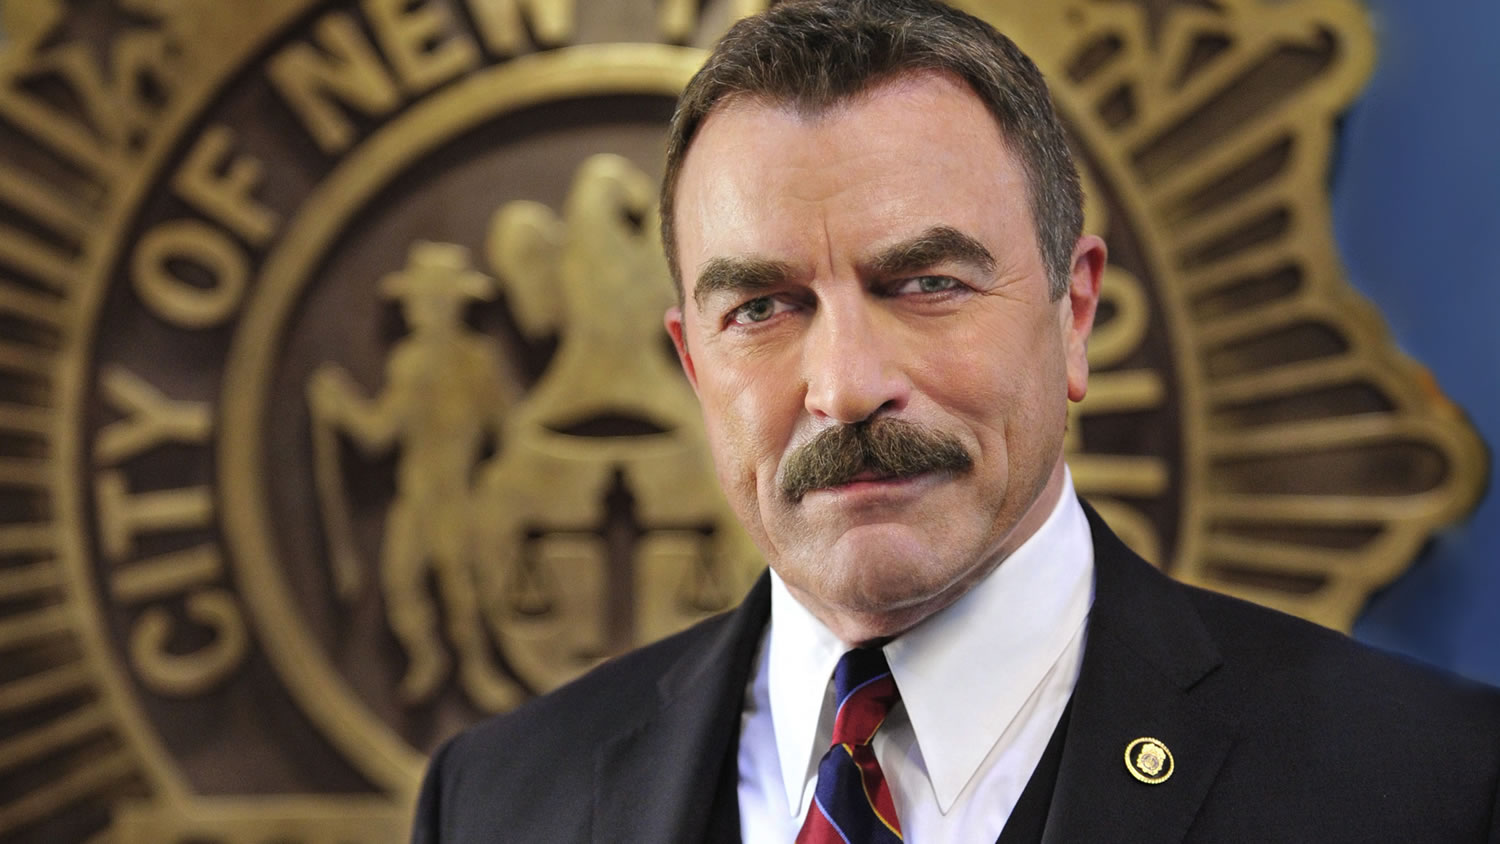 Blue Bloods Picture